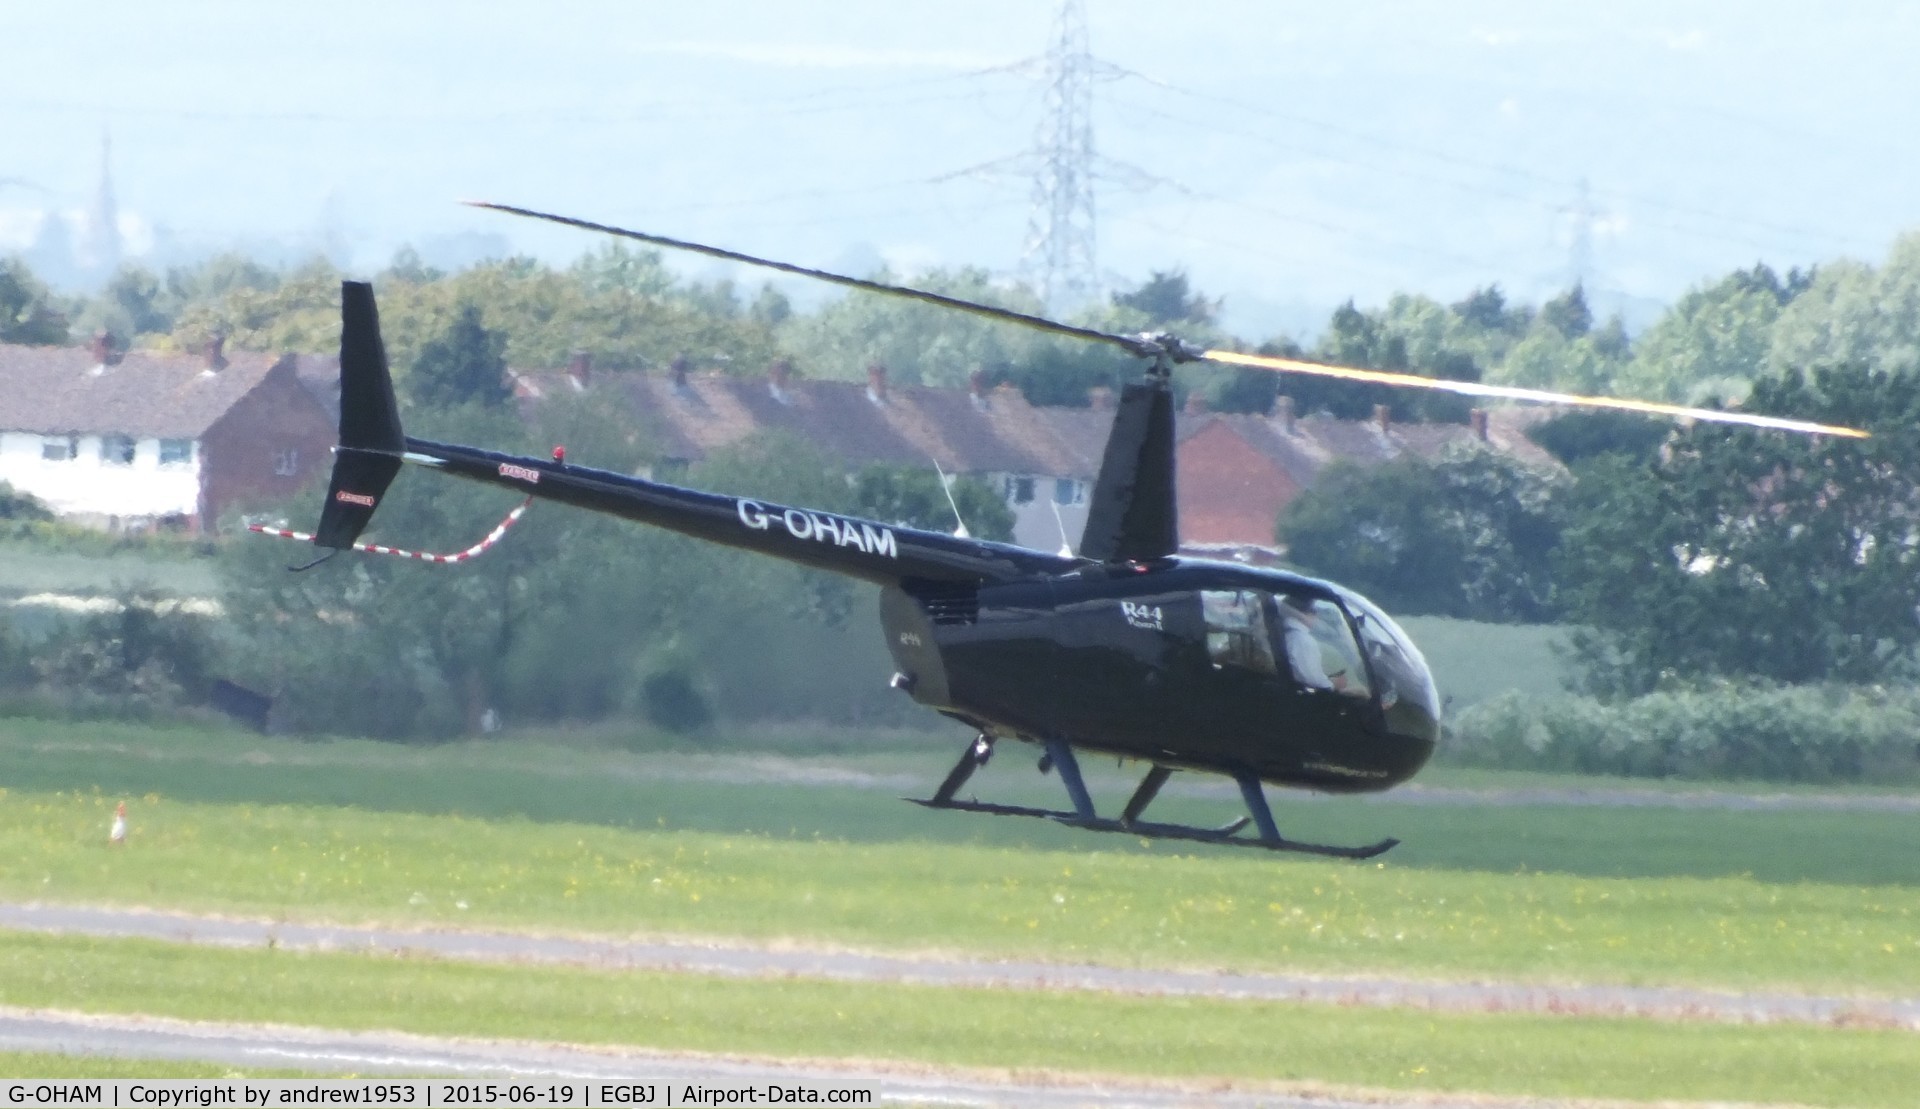 G-OHAM, 2005 Robinson R44 Raven II C/N 10743, G-OHAM at Gloucestershire Airport.